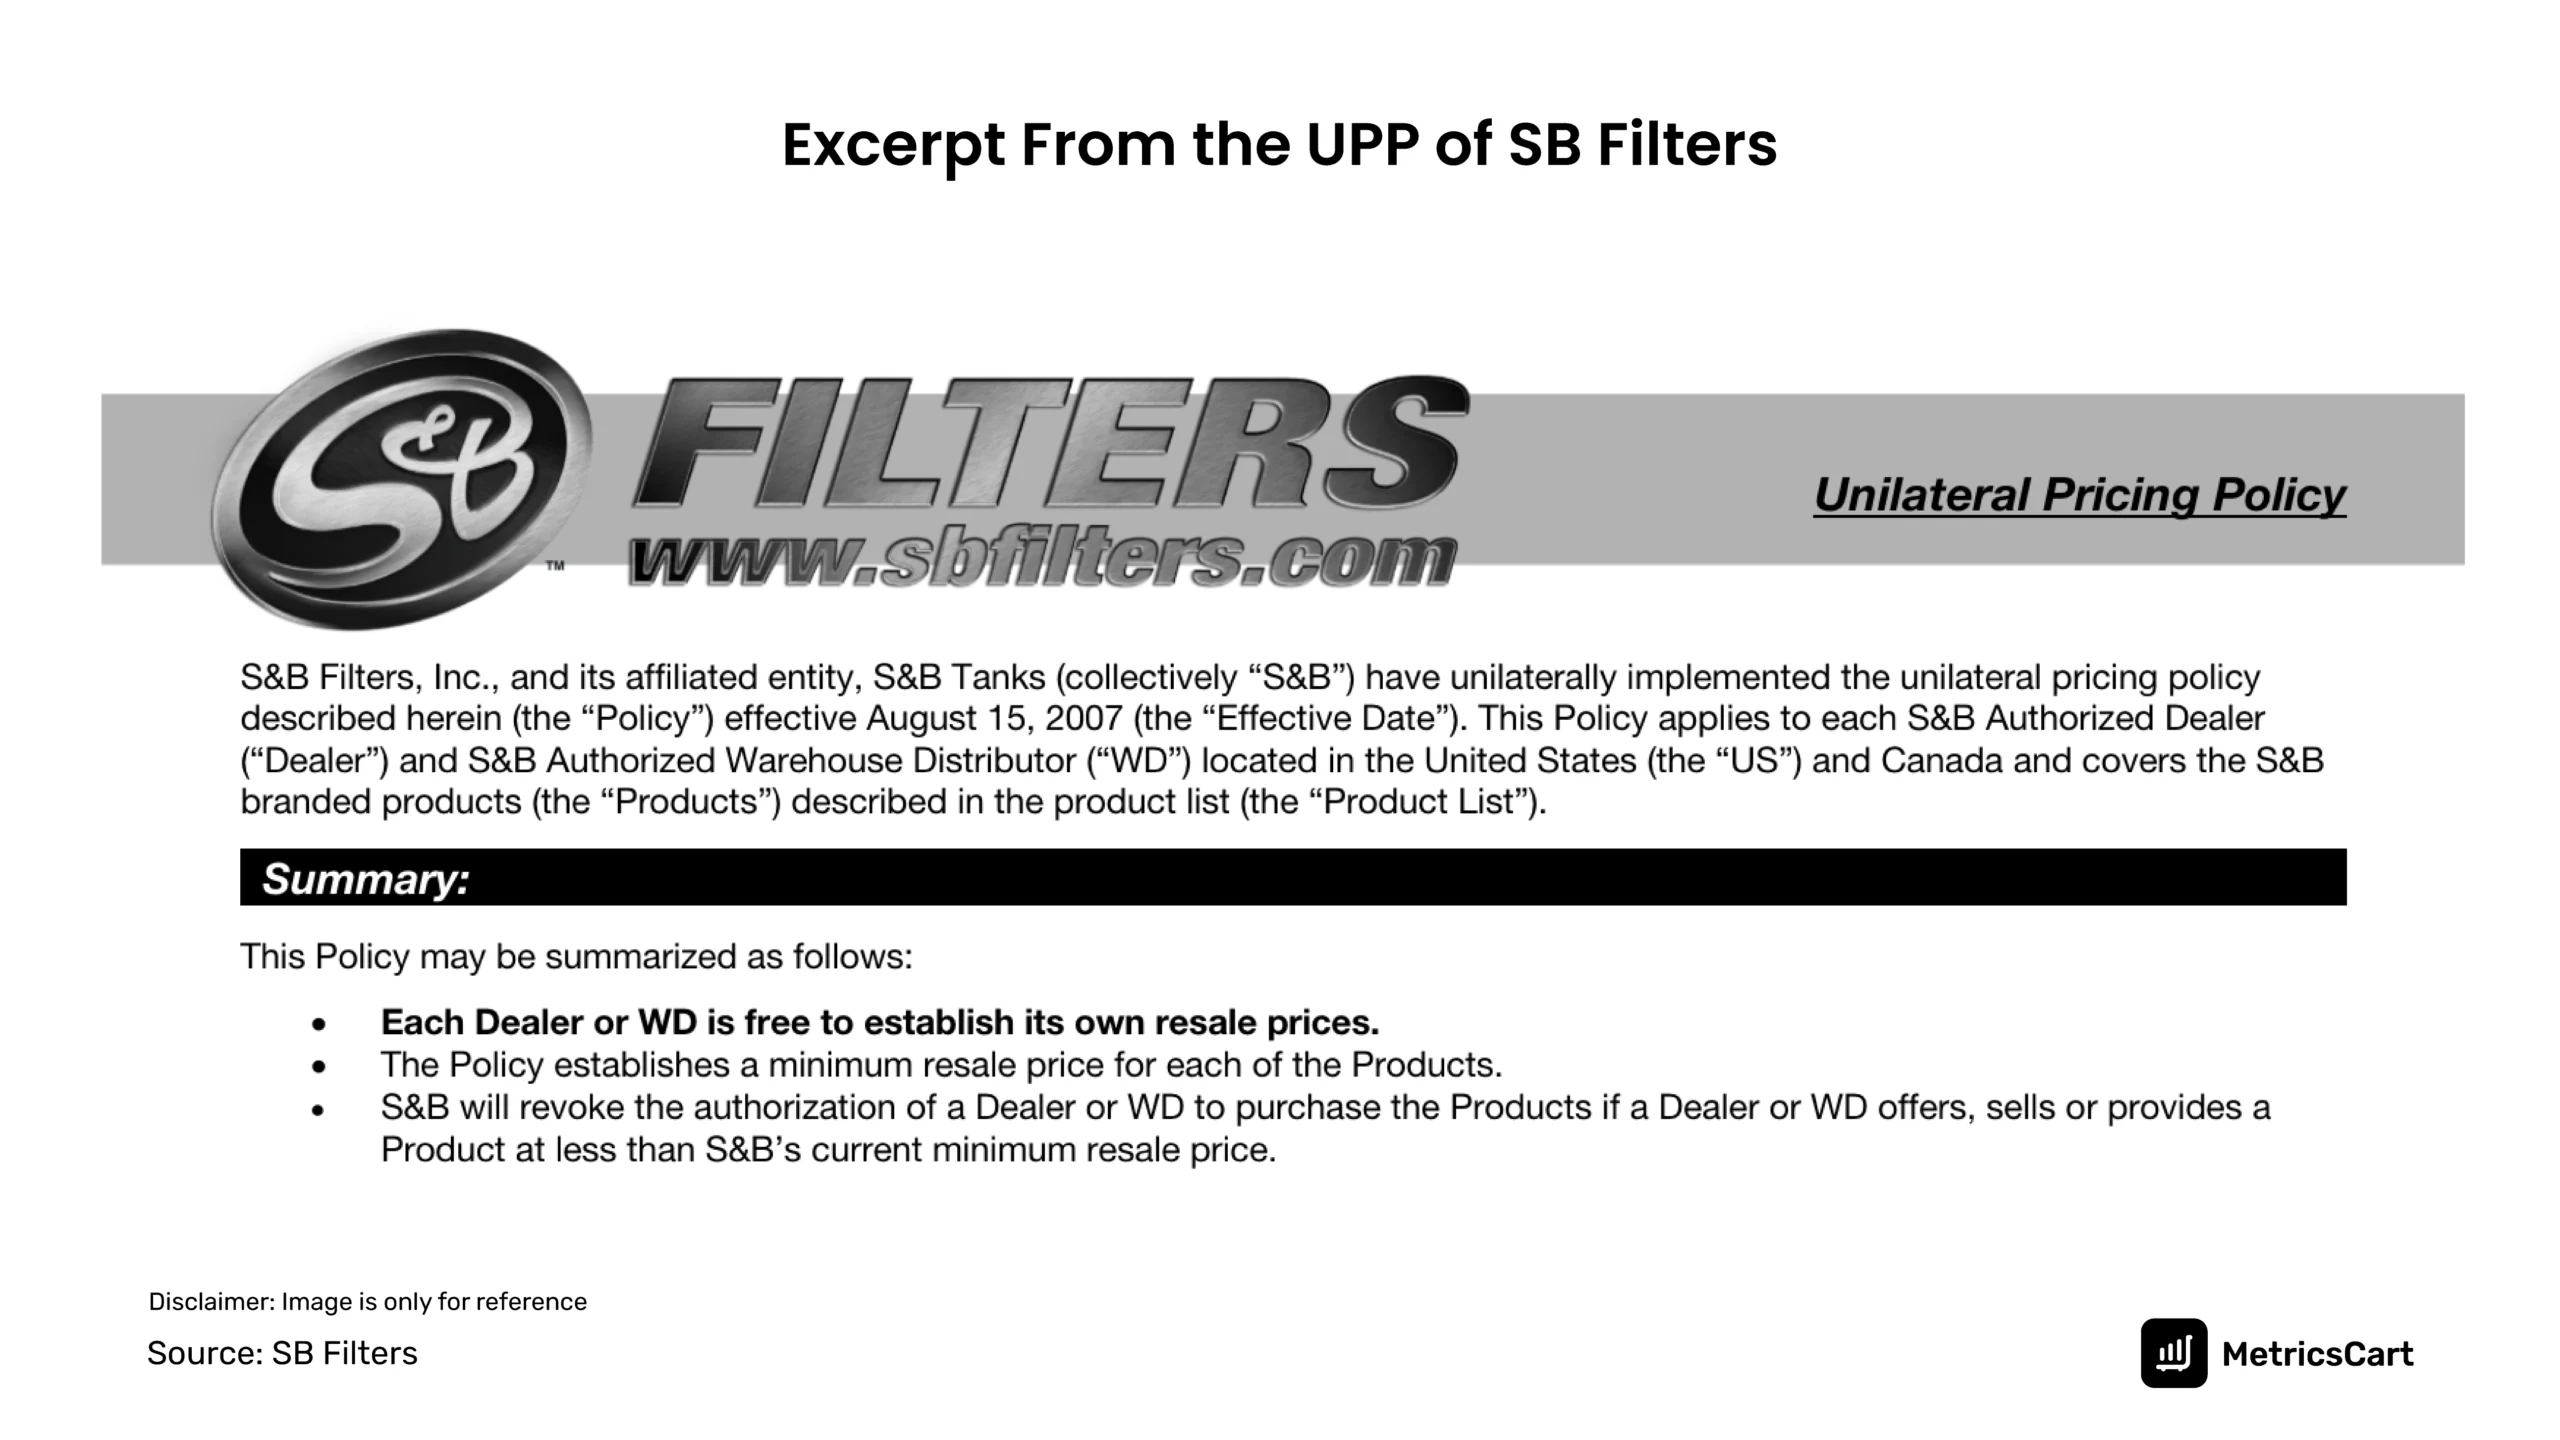 An excerpt from the Unilateral Pricing Policy of SB Filters